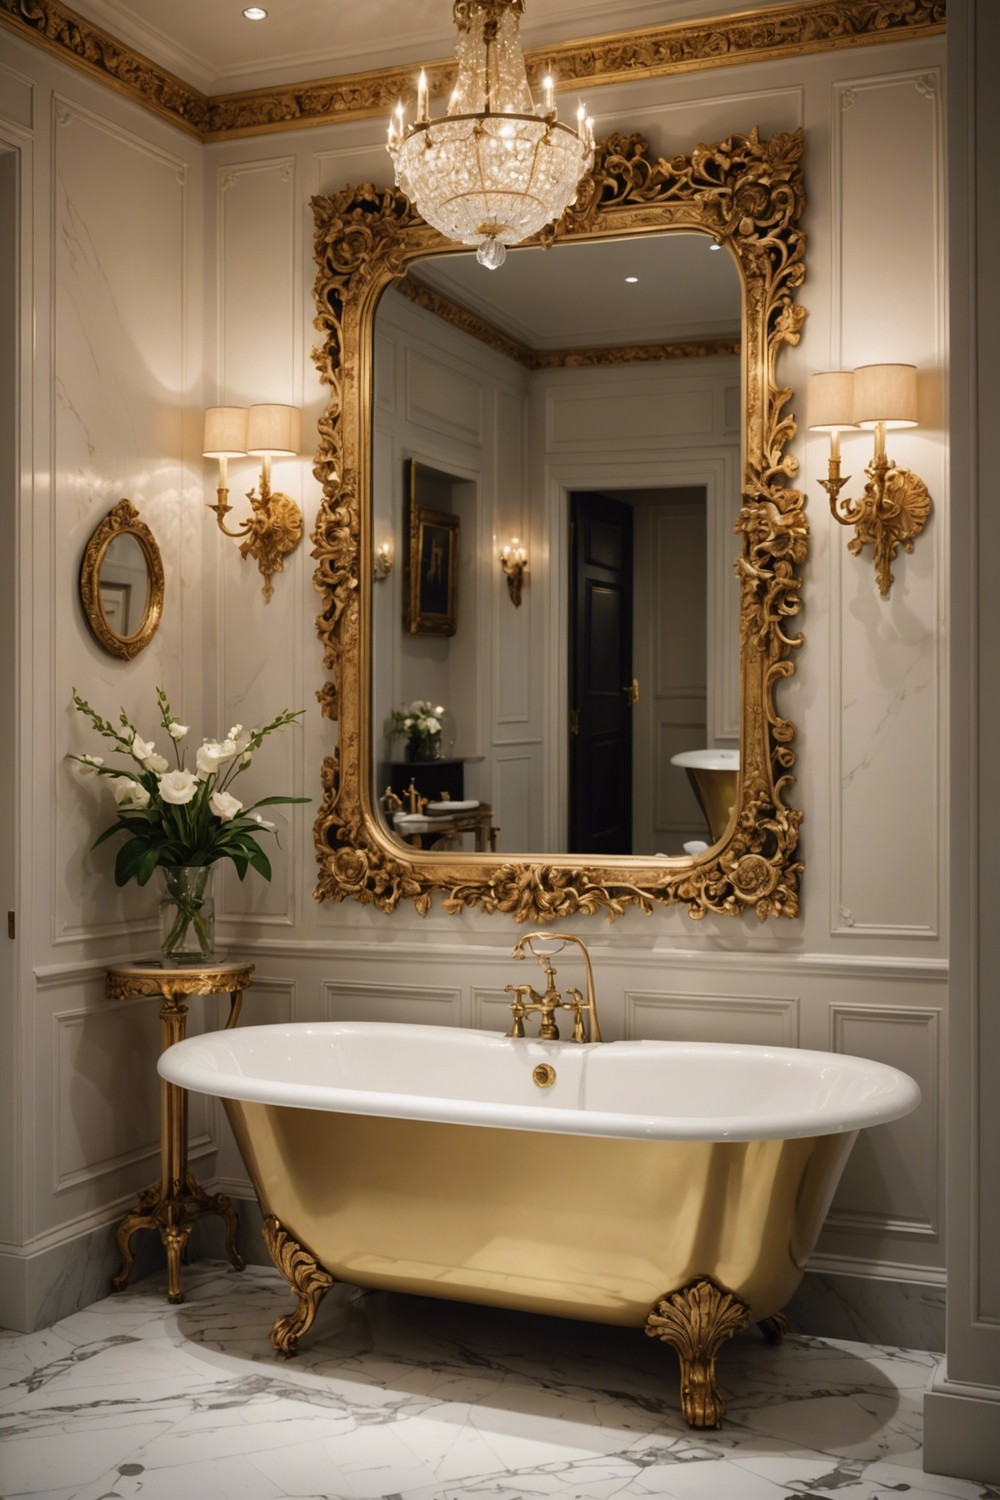 Ornate Gold Leaf Mirrors for a Luxurious Feel